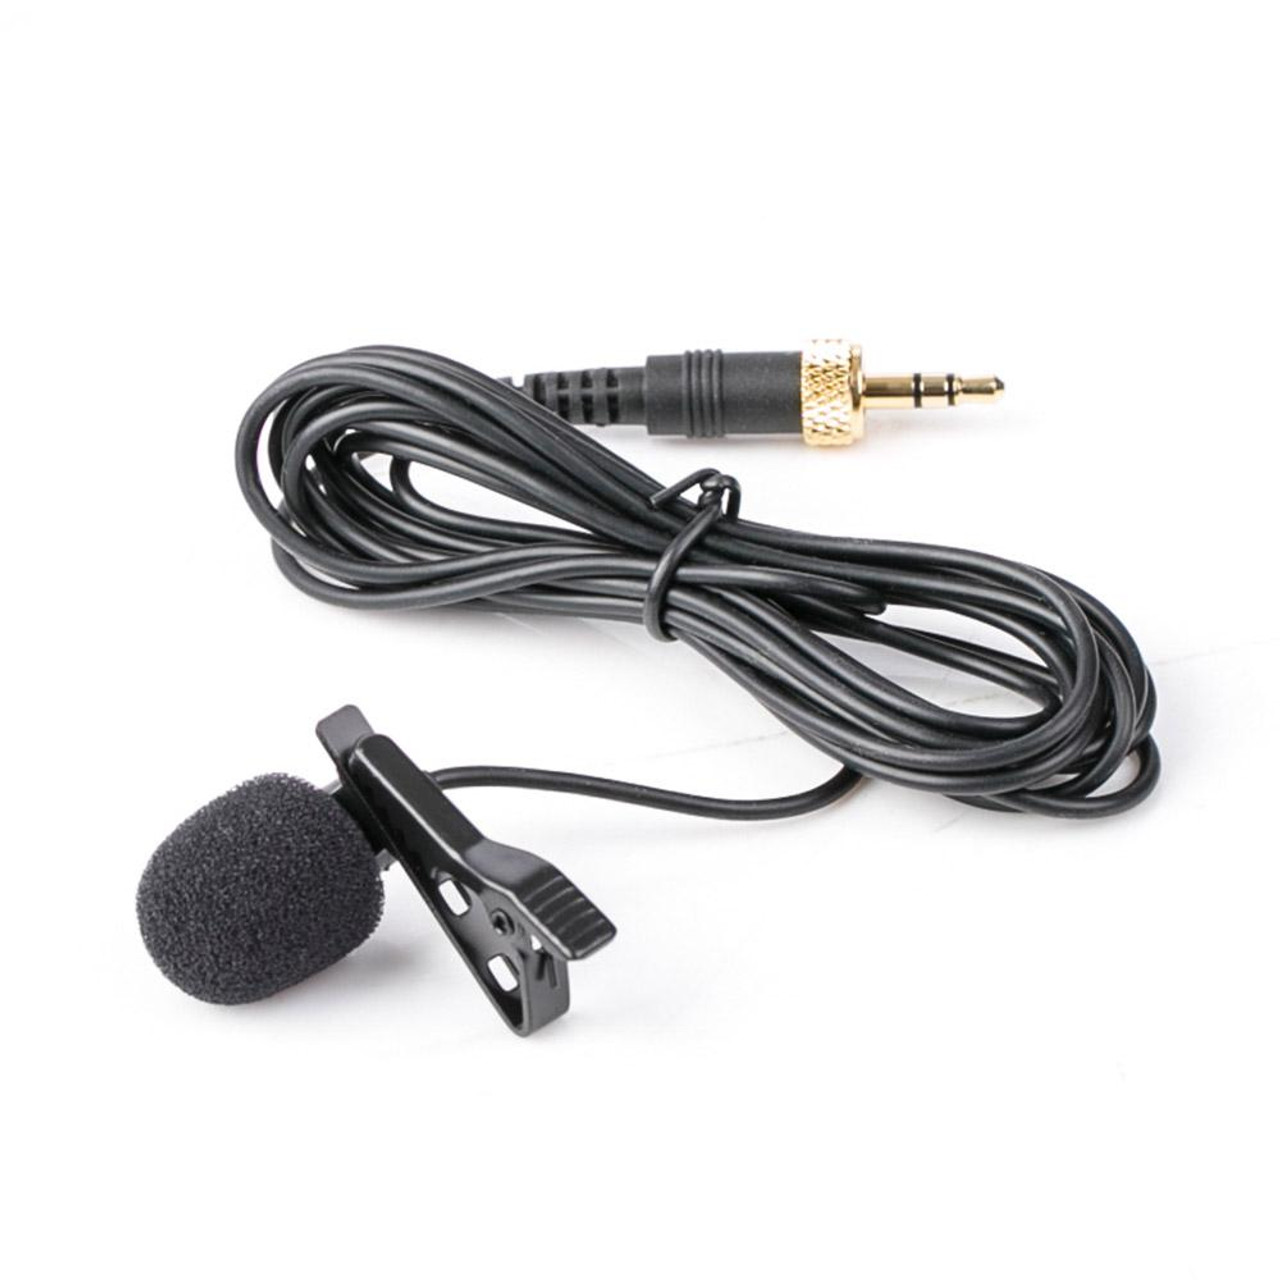 Saramonic SR-UM10-M1 Replacement Lavalier Microphone with Locking 3.5mm (1/8") TRS Male for Saramonic Wireless Transmitters